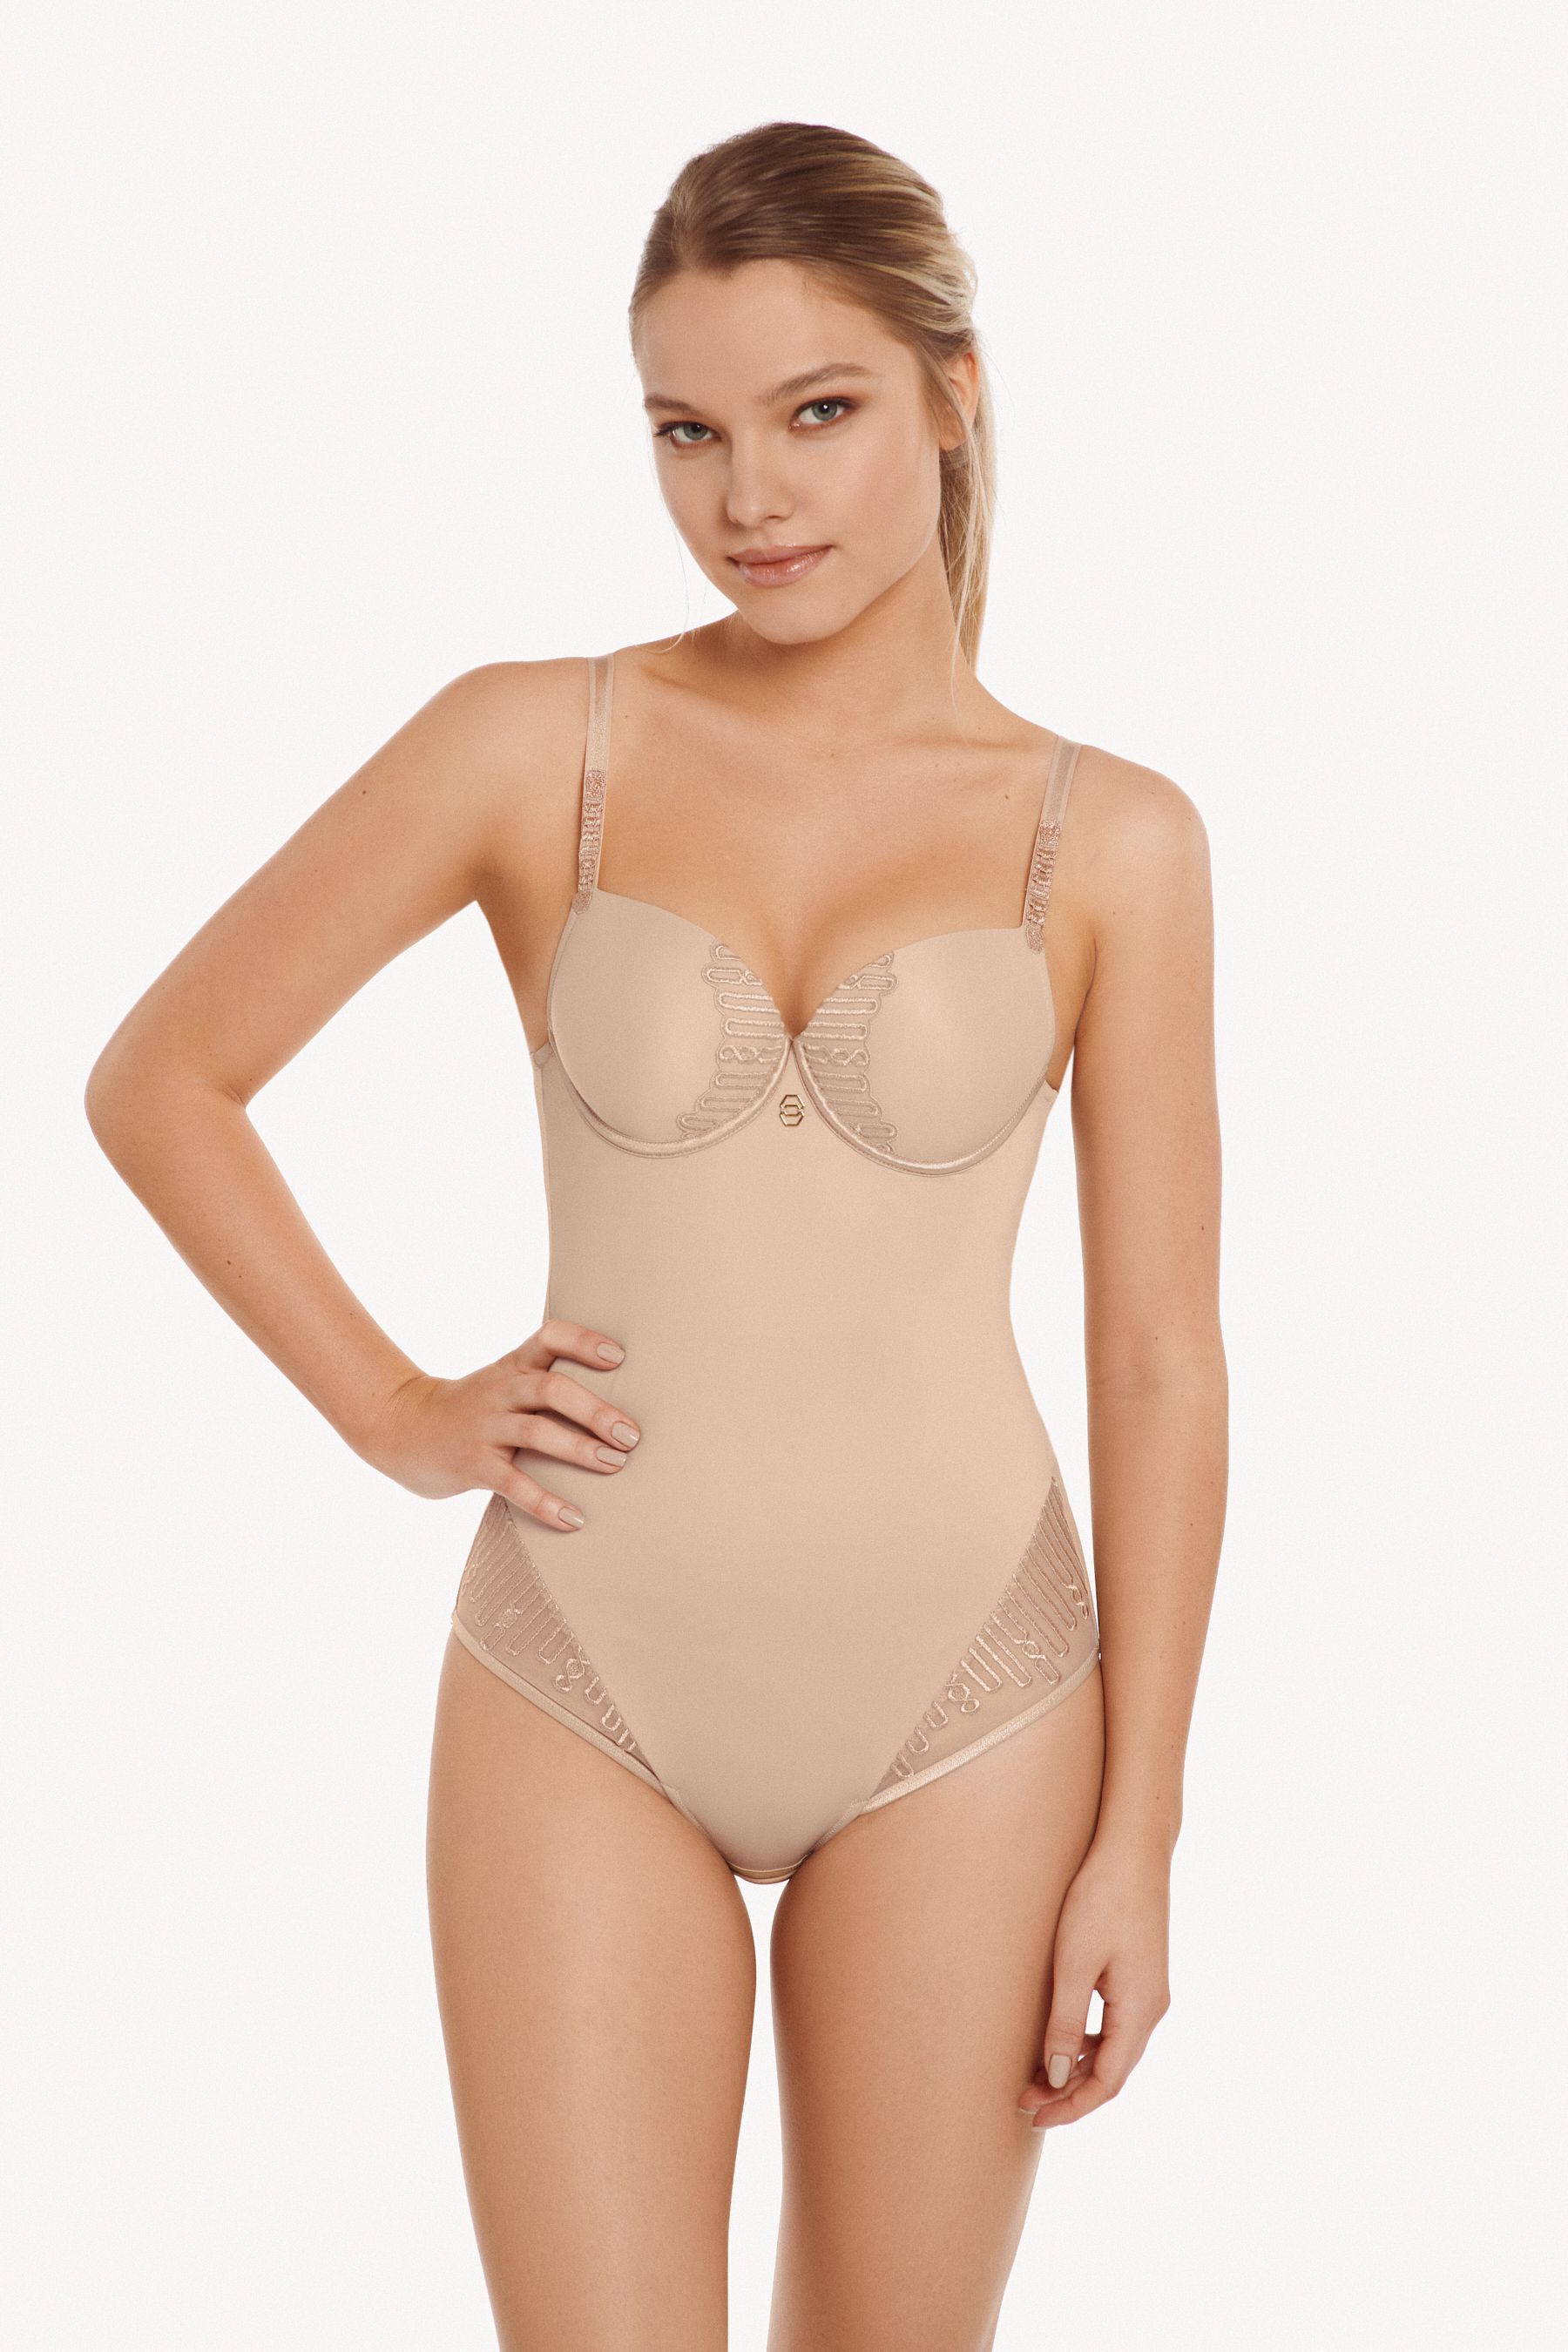 This modern underwired body with soft foam cups from the Lisca 'Ivonne' range features soft and comfortable microfibre combined with attractive transparent embroidery. The smoothly shaped cups and soft edges allow for a seamless look under fitted clothing. The body features an attractive embroidered butterfly-shaped design between the cups with a metal decorative detail. The front of this body is lined with functional elastic tulle to help shape and smooth your body. The adjustable straps feature decorative applique at the front. The straps are wider for larger sizes. The back of the body has a slightly U-shaped design and the fastening band at the gusset enables three-level length adjustment.  